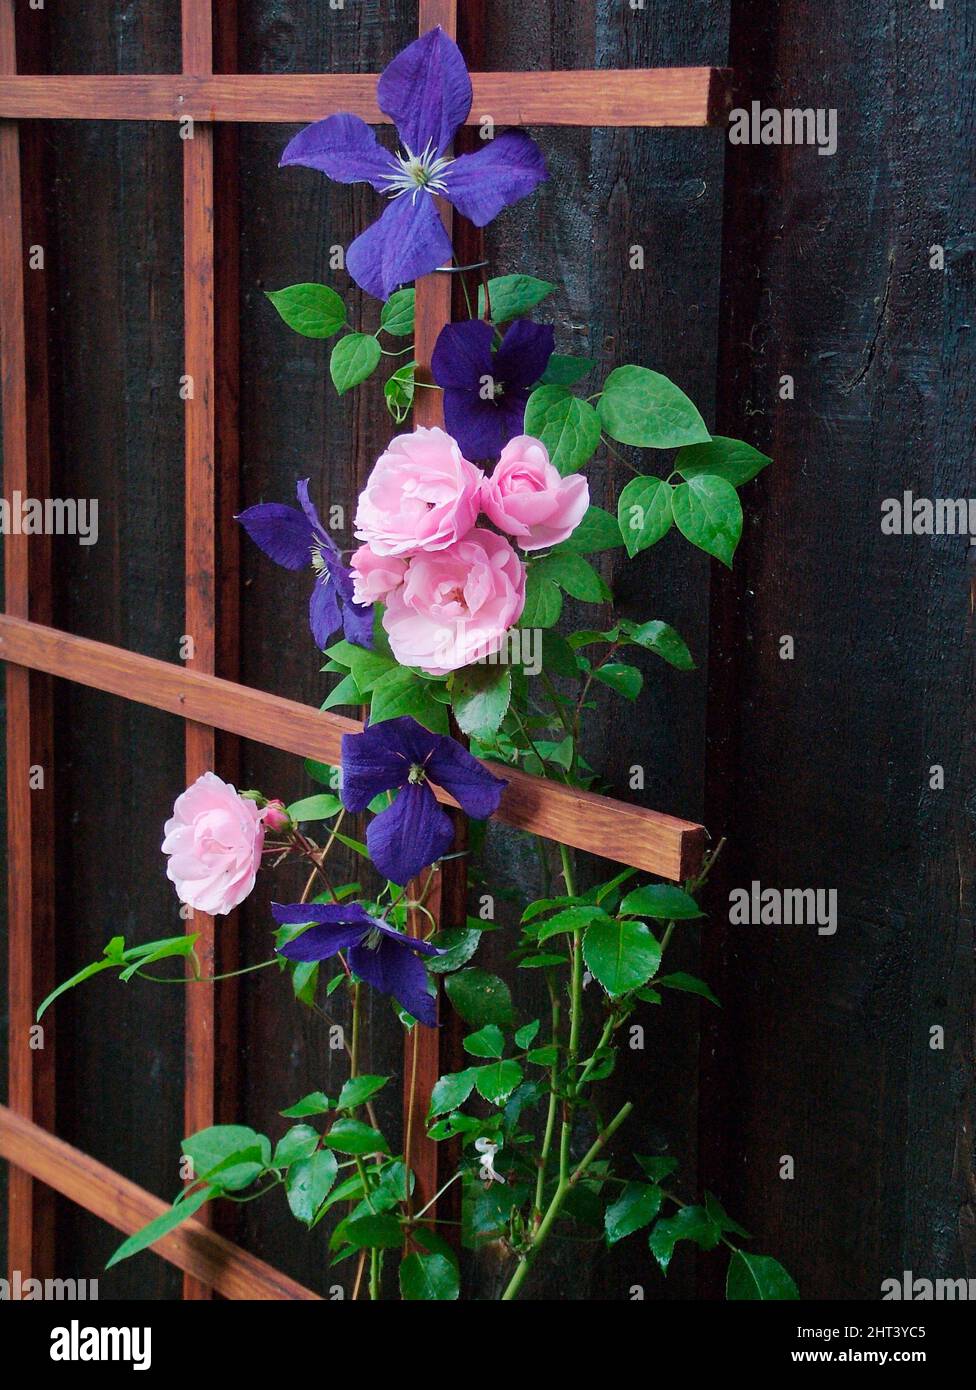 Clematis and rose 'Bonica' on trellis Stock Photo